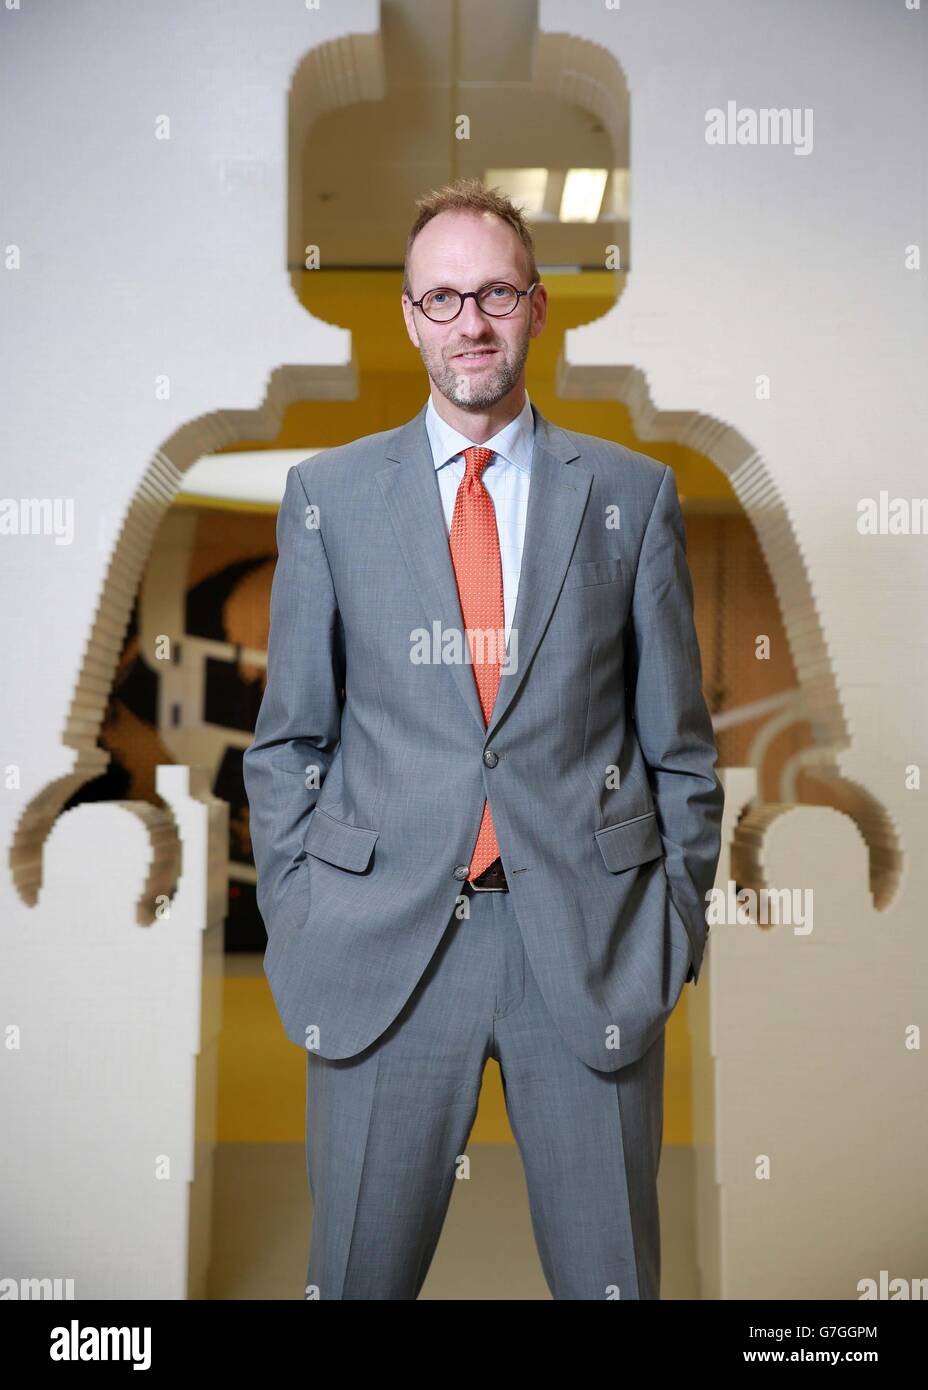 President and Chief Executive Officer of the LEGO Group, Jorgen Vig Knudstorp, attends the opening of the LEGO Group's new office in central London. Stock Photo